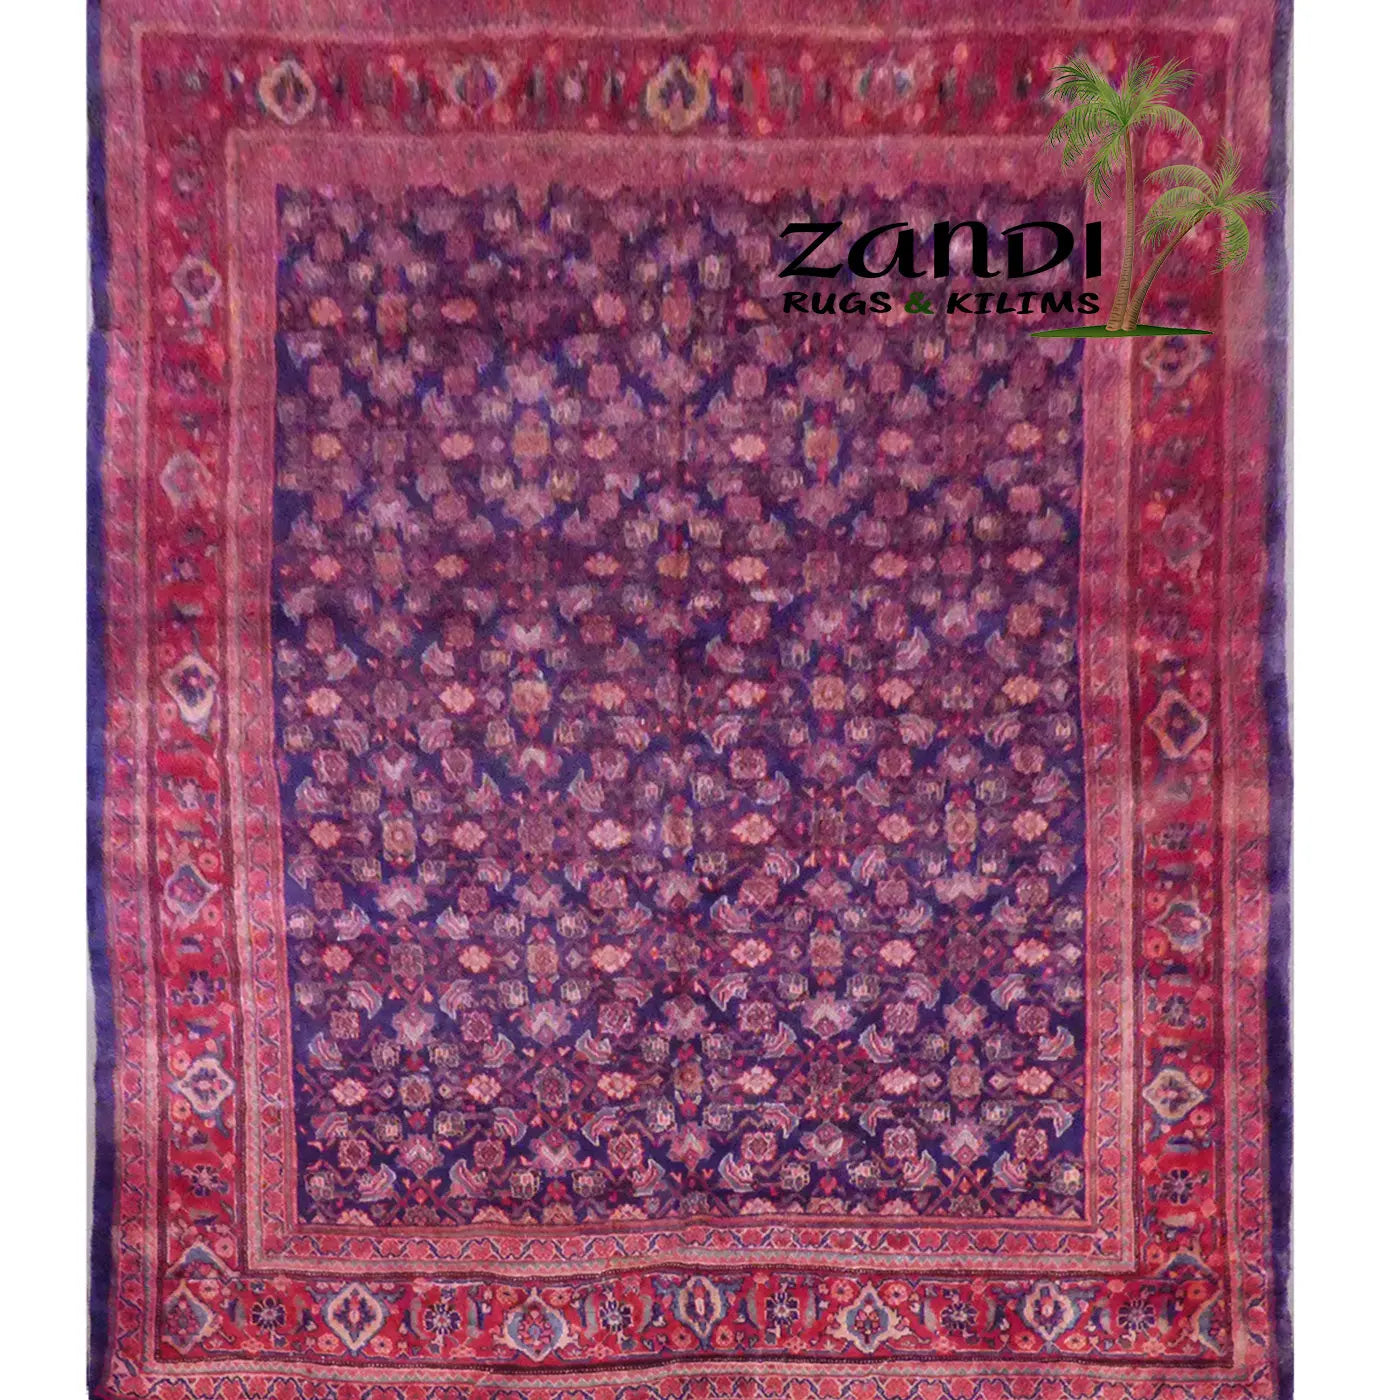 Sirdjan Semi Antique Hand Knotted Persian Tabriz Rugs, Traditional Floral, Natural Vegetable Dyes, Wool, Red, 12'4" X 9'6", Panr12598 (Red : 12598)